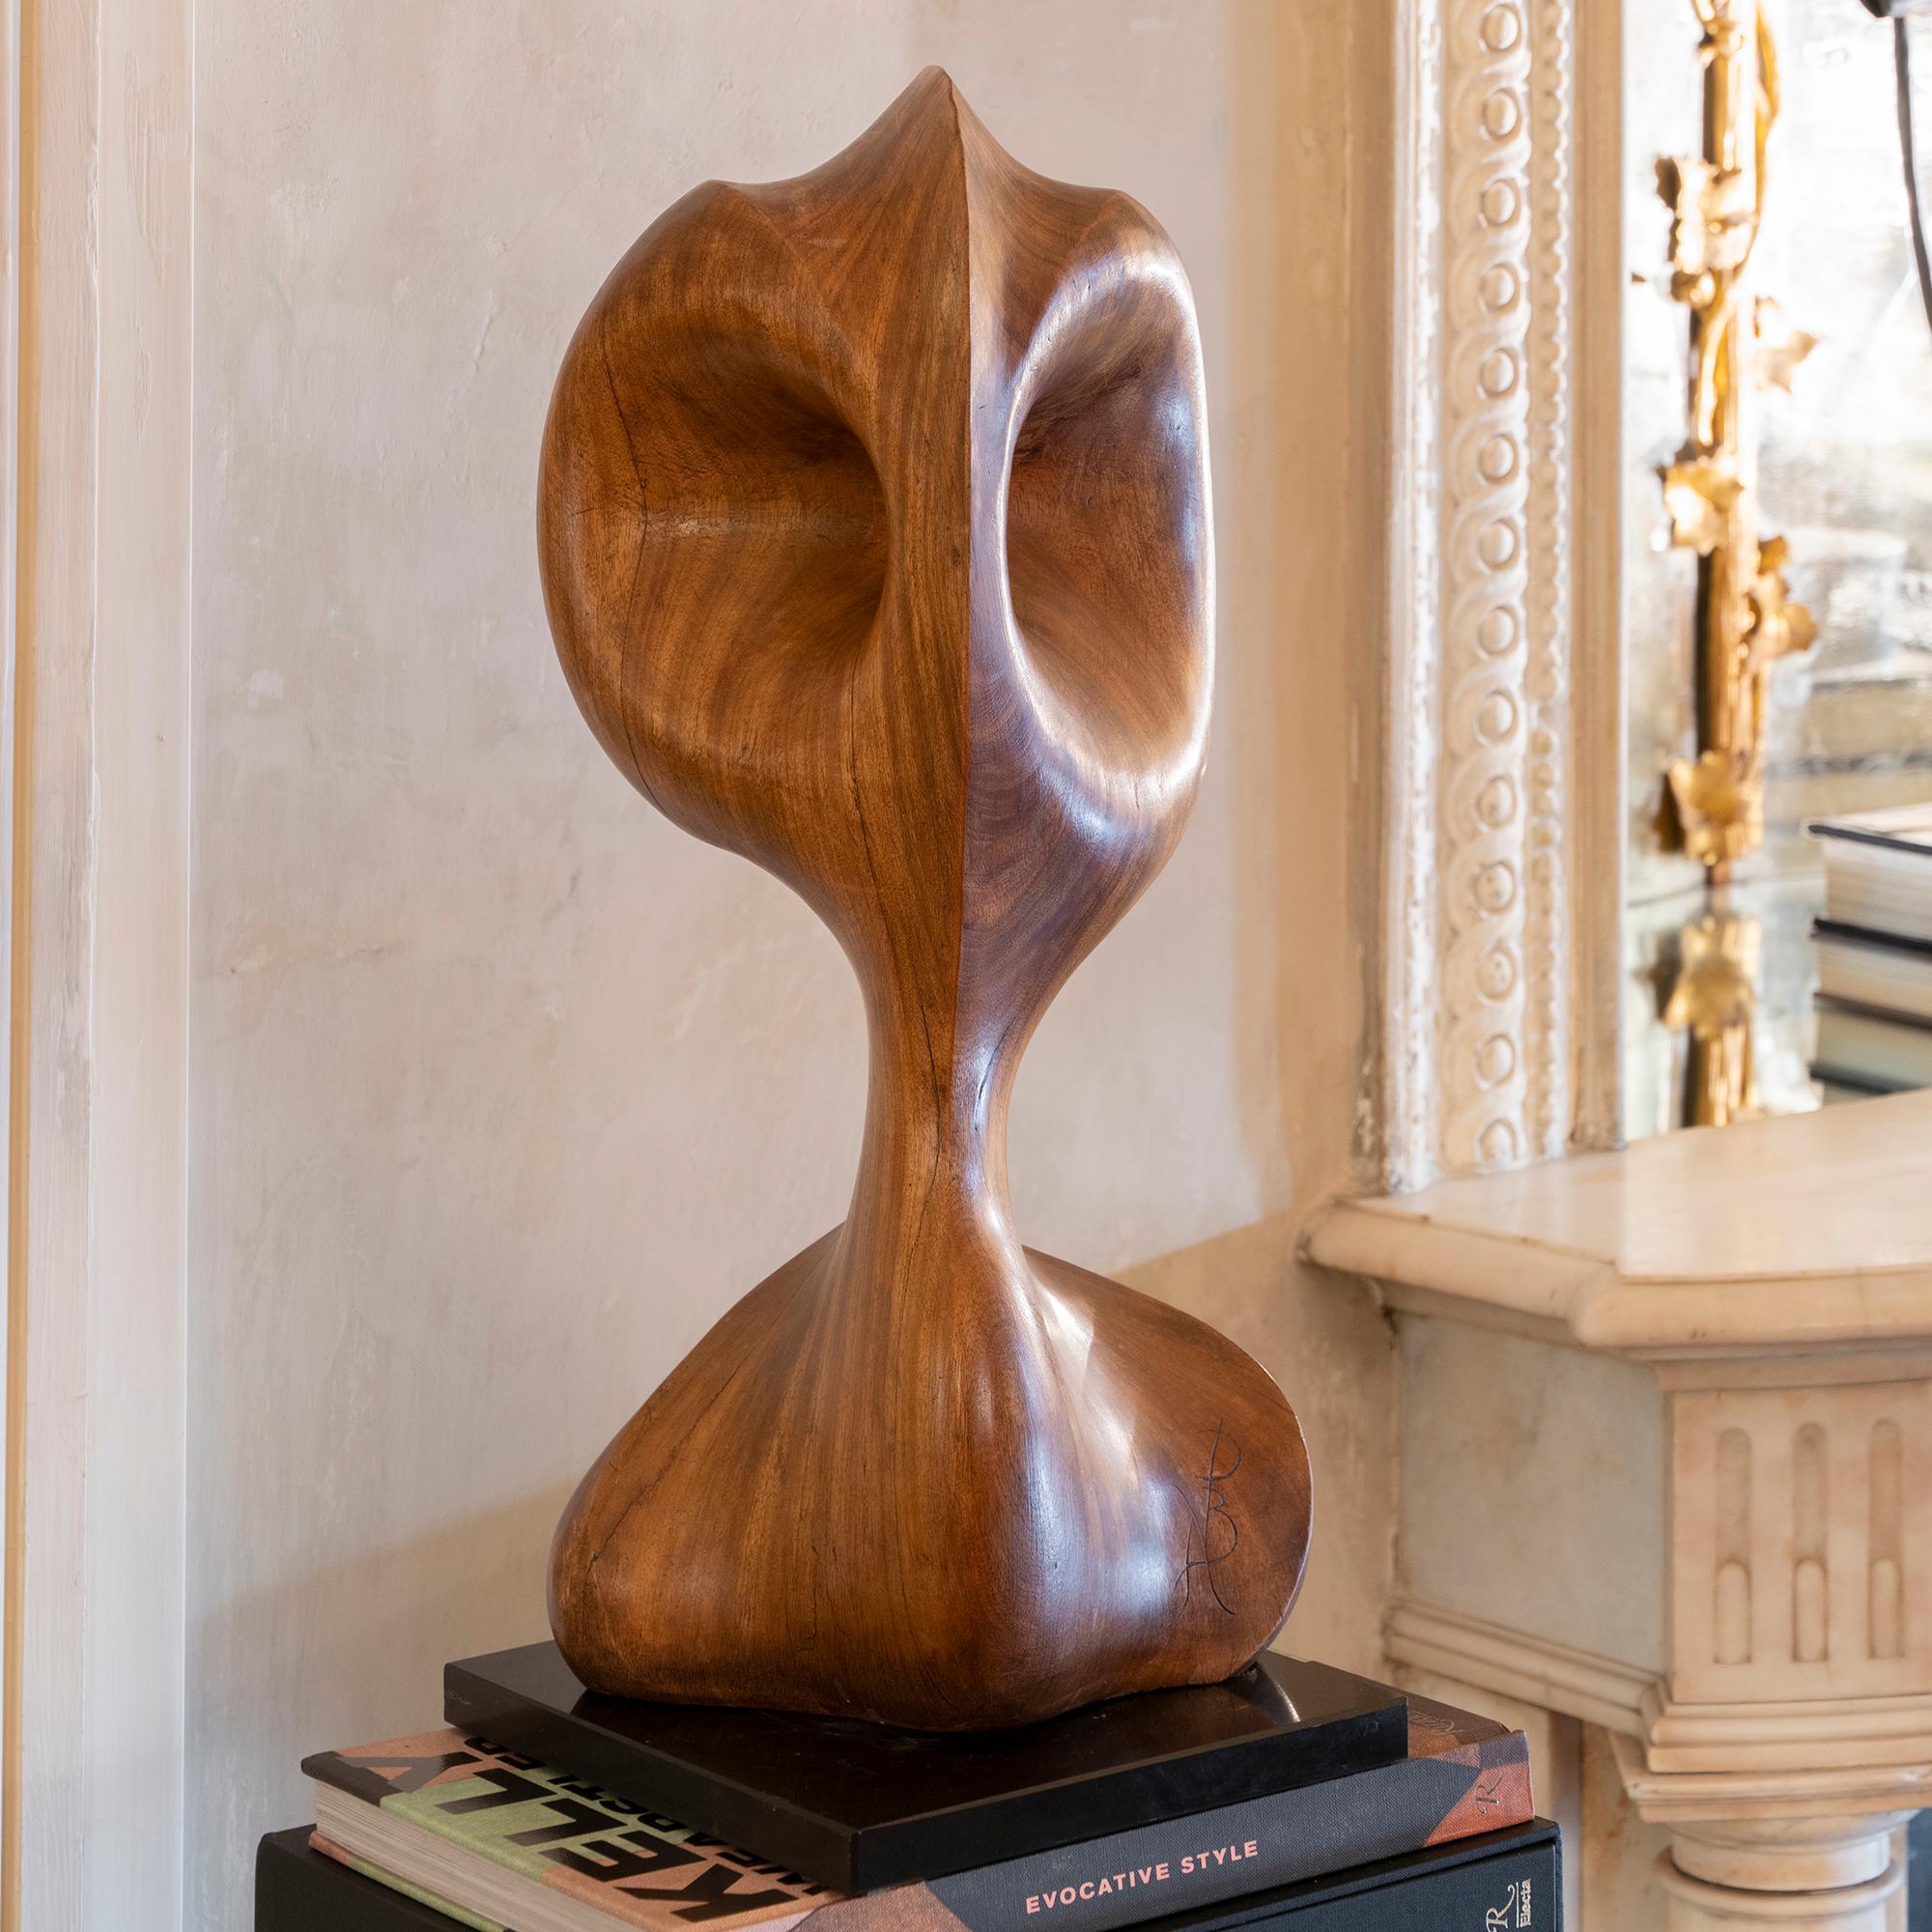 Carved wood abstract sculpture, original black marble base, perfect vintage condition and patina, unknown signed, France circa 1970s.